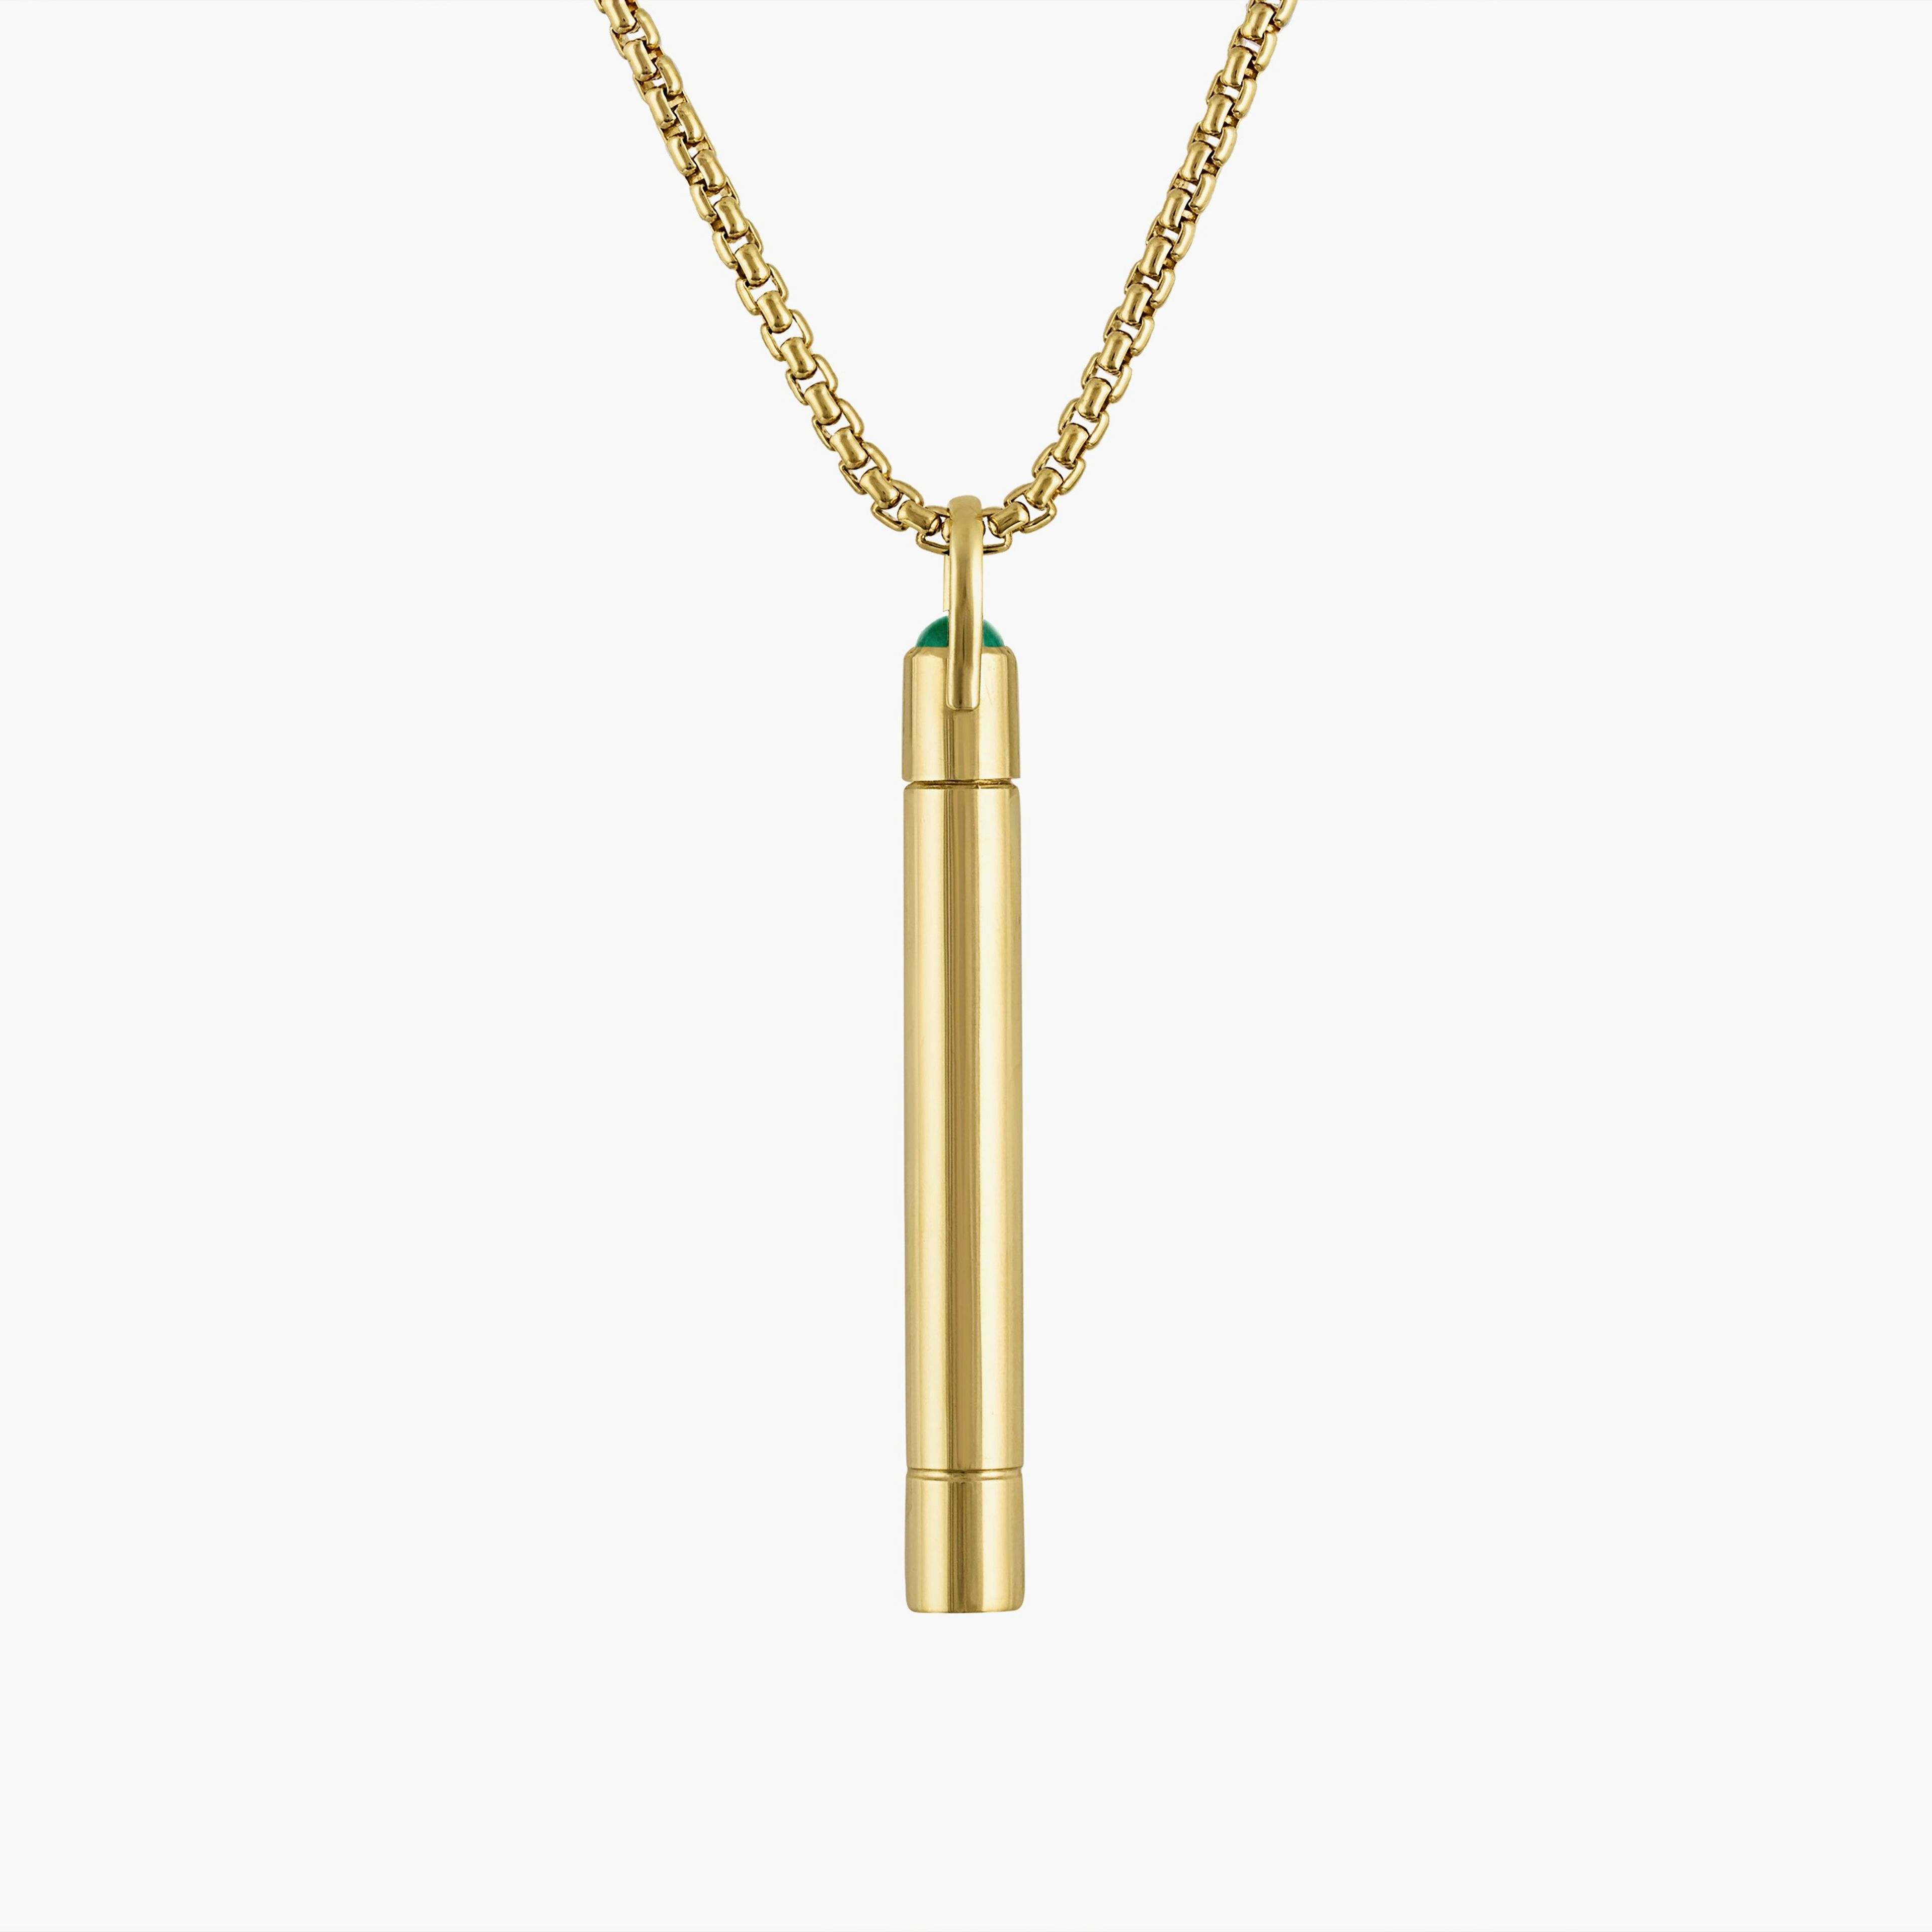 Stash Pendant 18k Yellow Gold with Cabochon Emerald